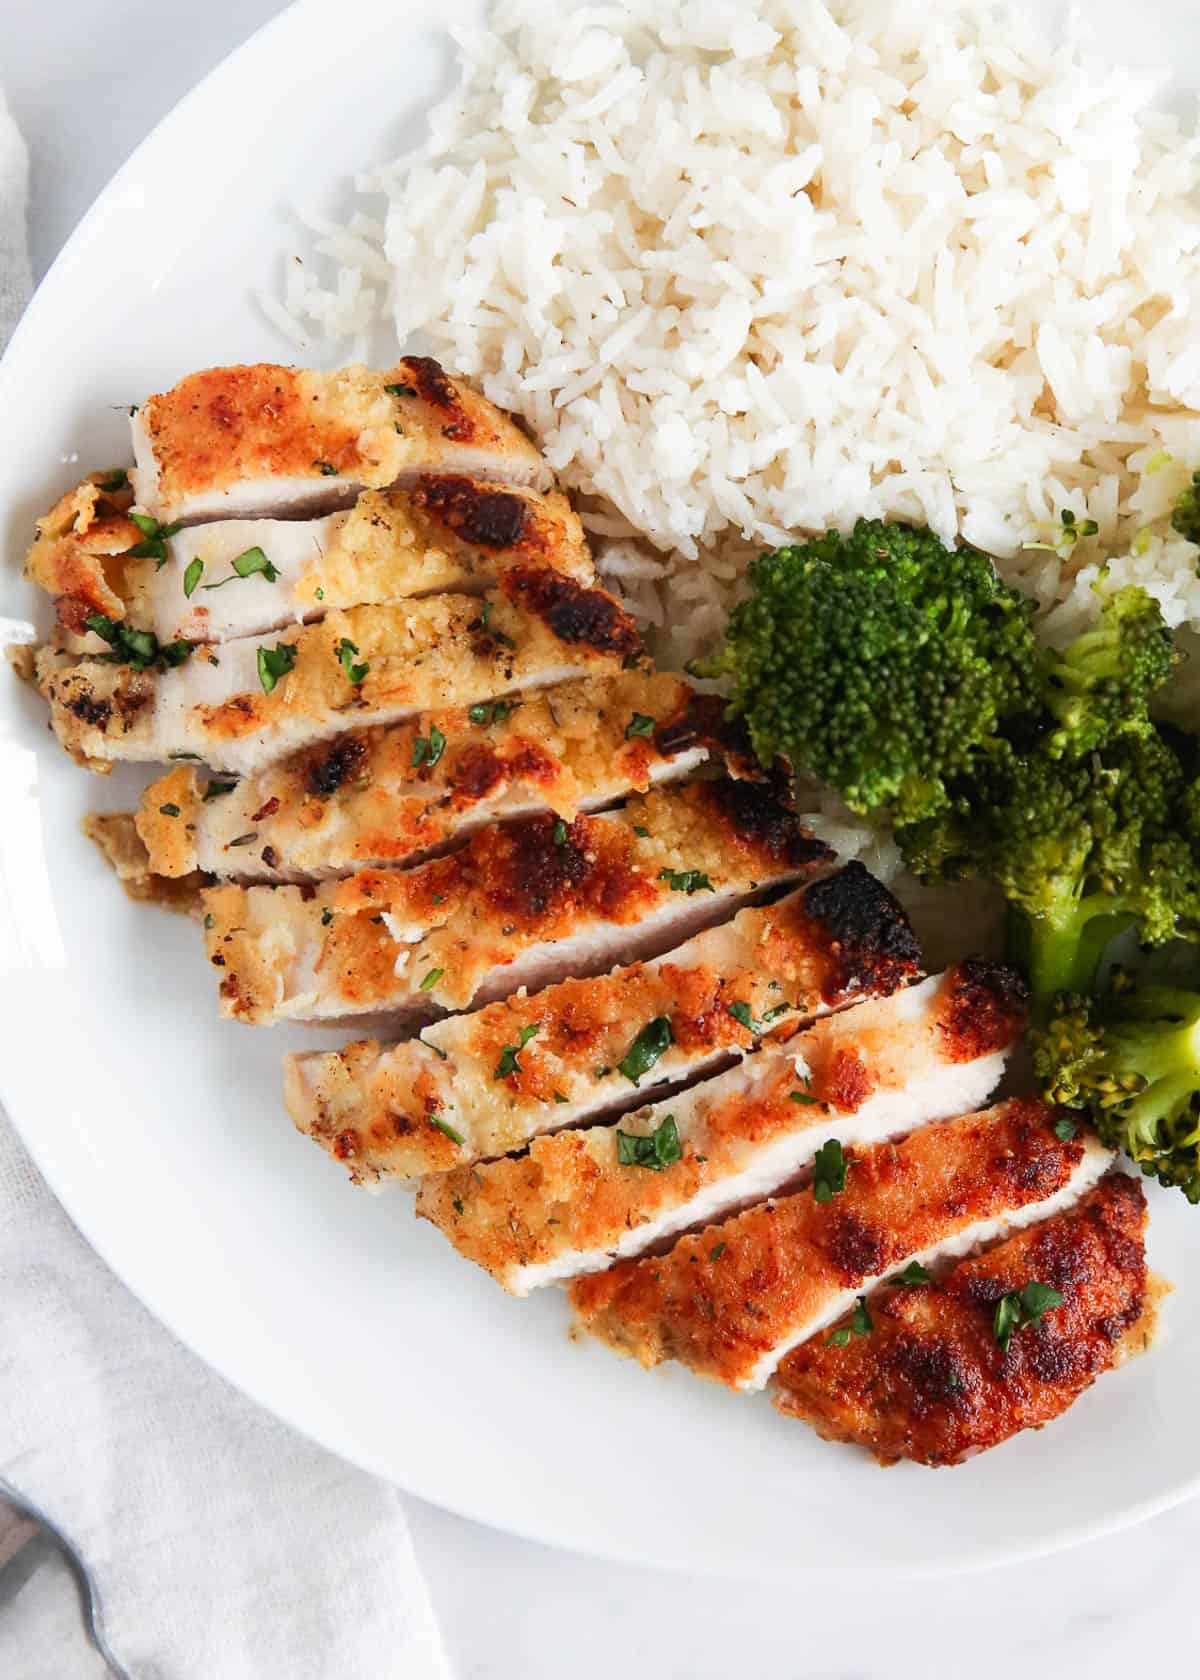 Parmesan crusted chicken sliced with rice and broccoli.